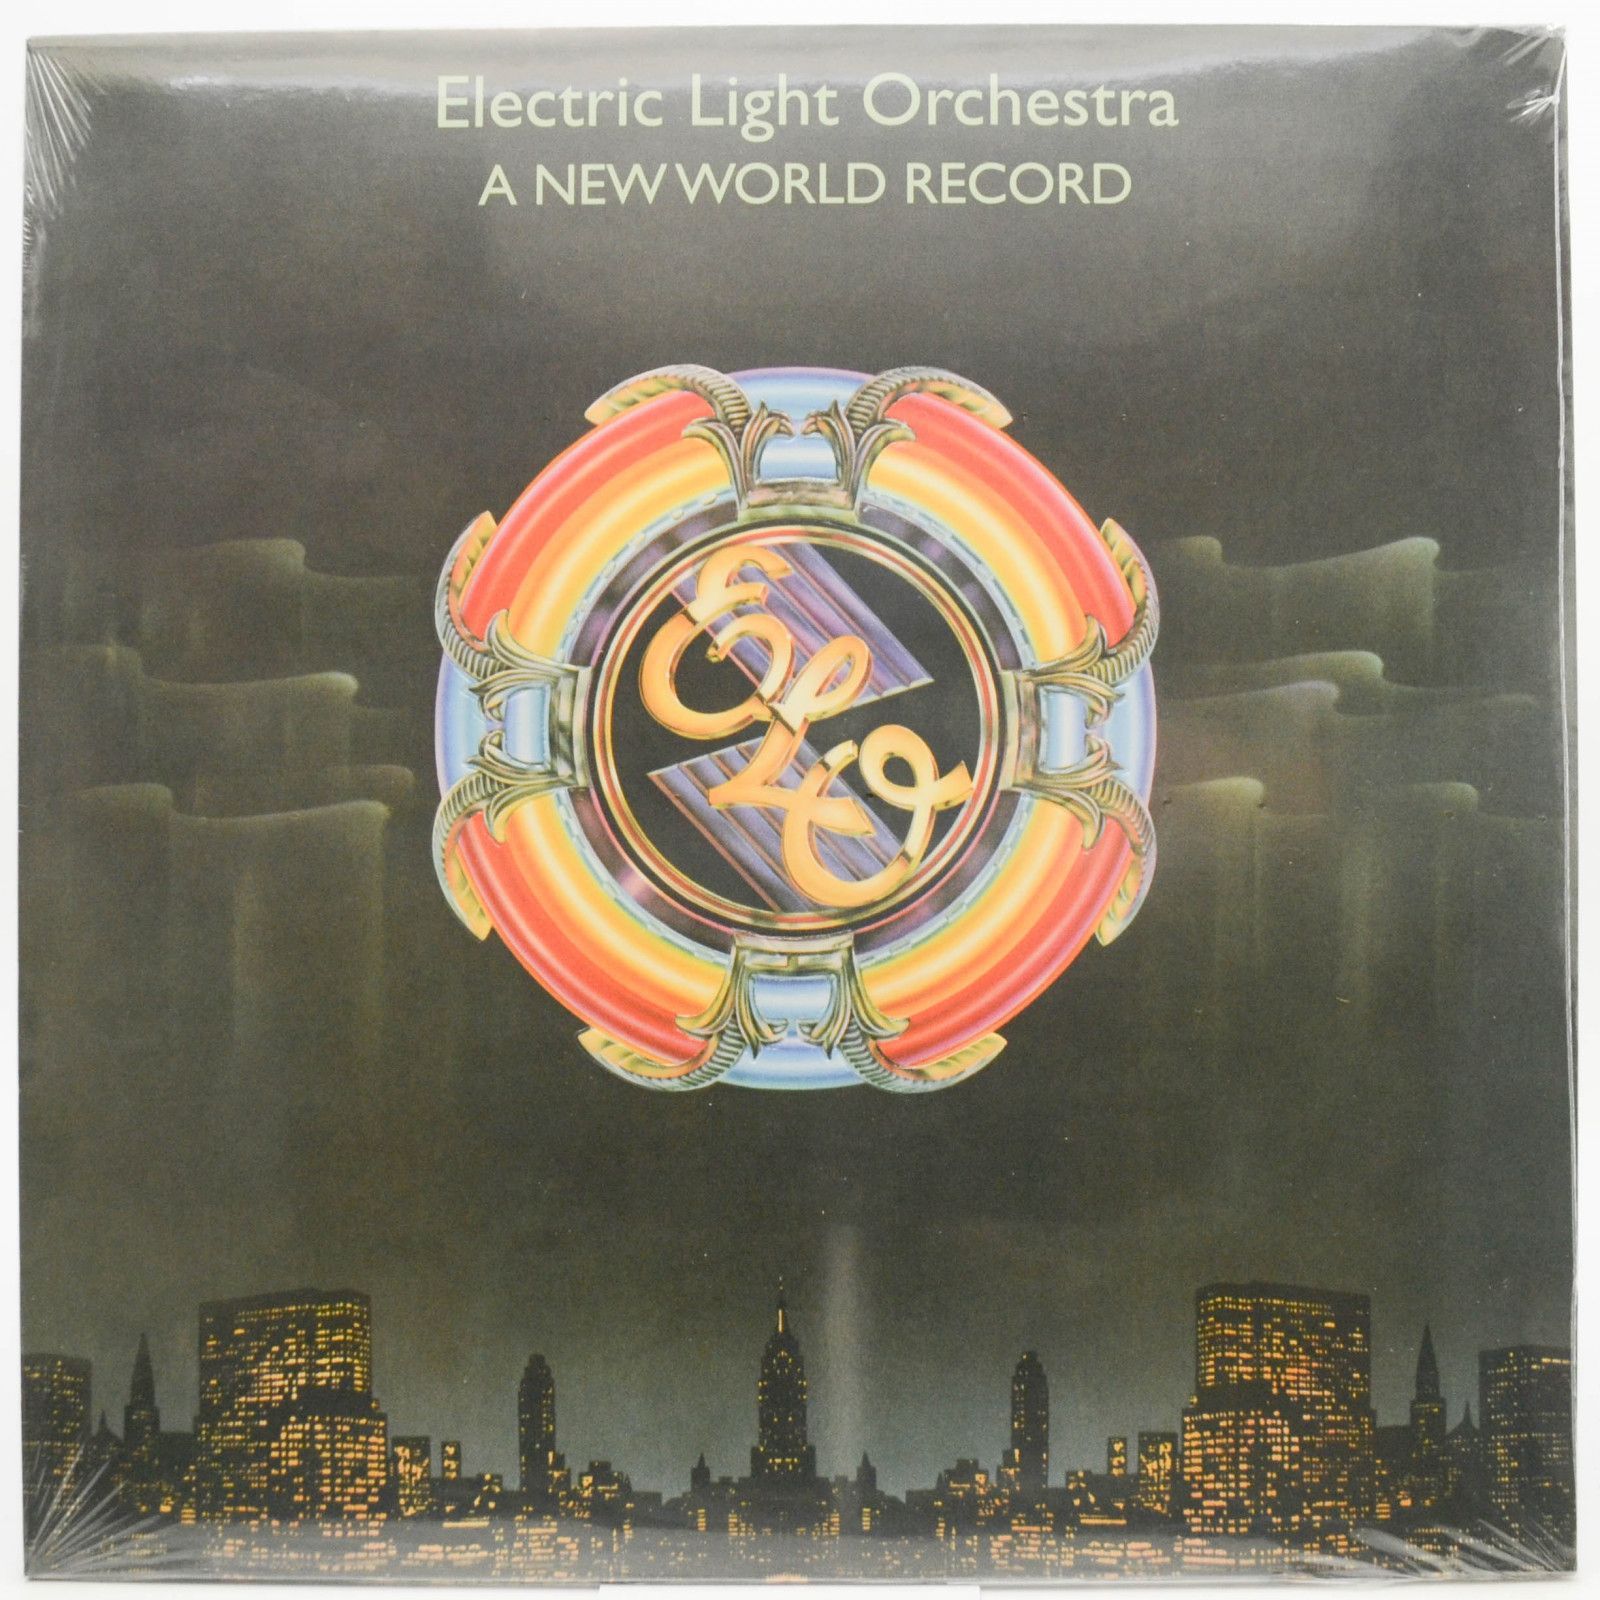 Electric Light Orchestra — A New World Record, 1976